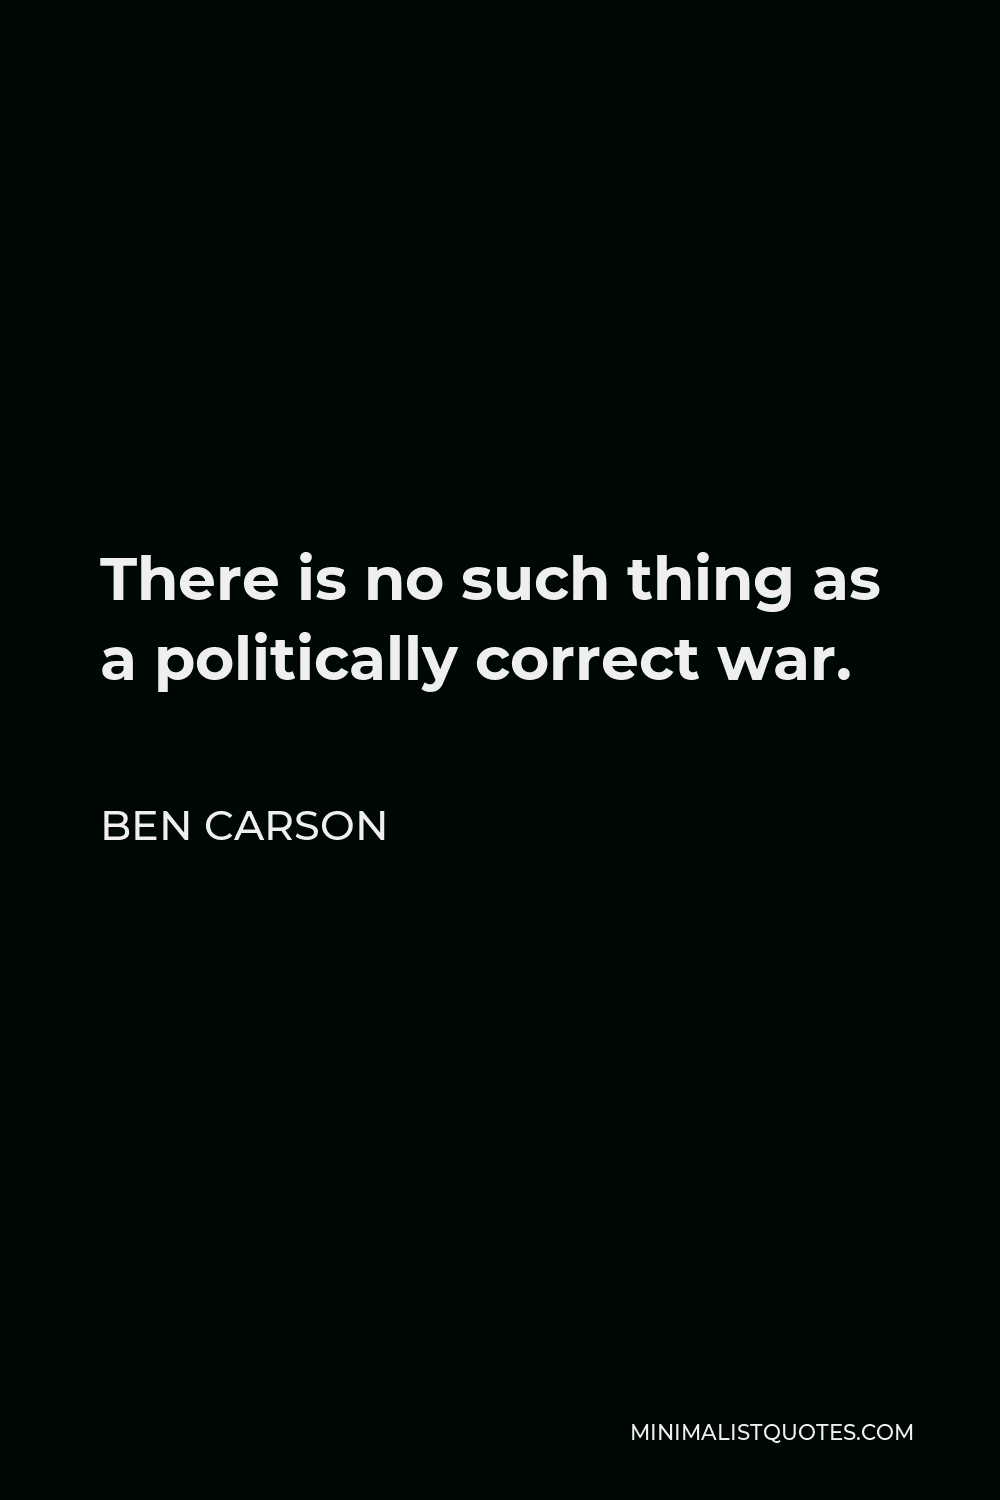 Ben Carson Quote - There is no such thing as a politically correct war.